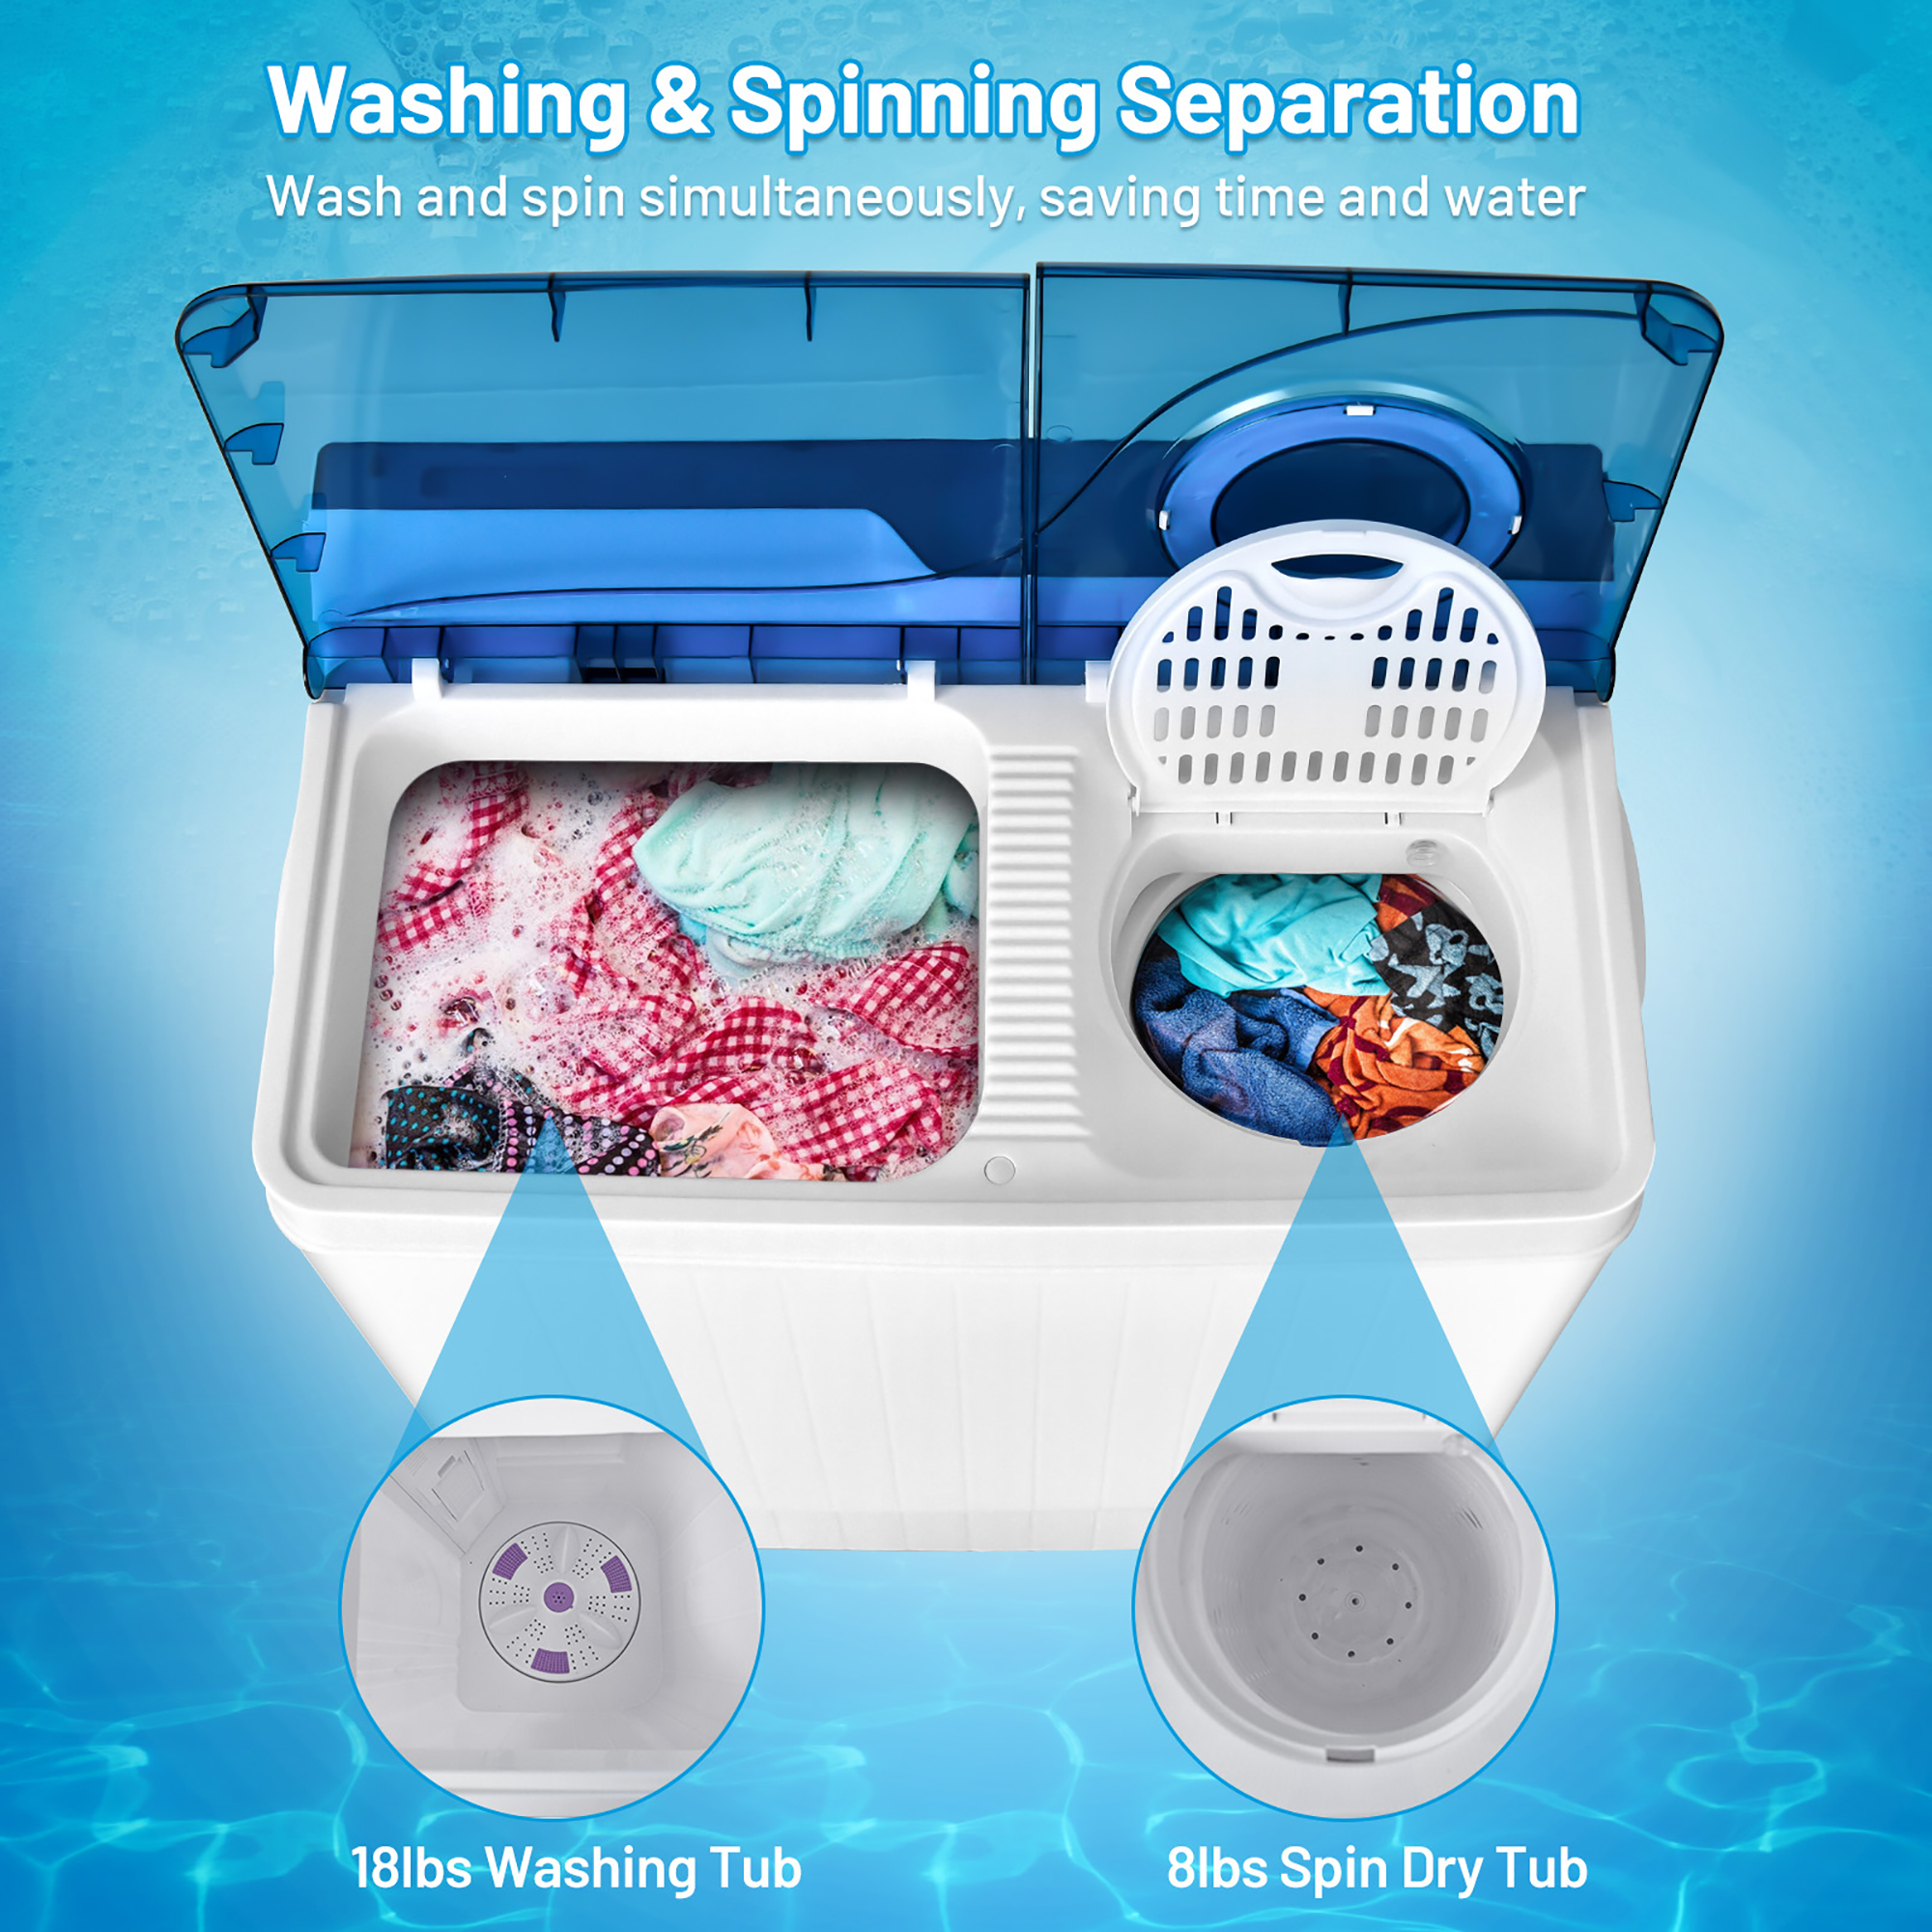 Costway 26lbs Portable Semi-automatic Washing Machine W/Built-in Drain Pump Blue - image 3 of 10